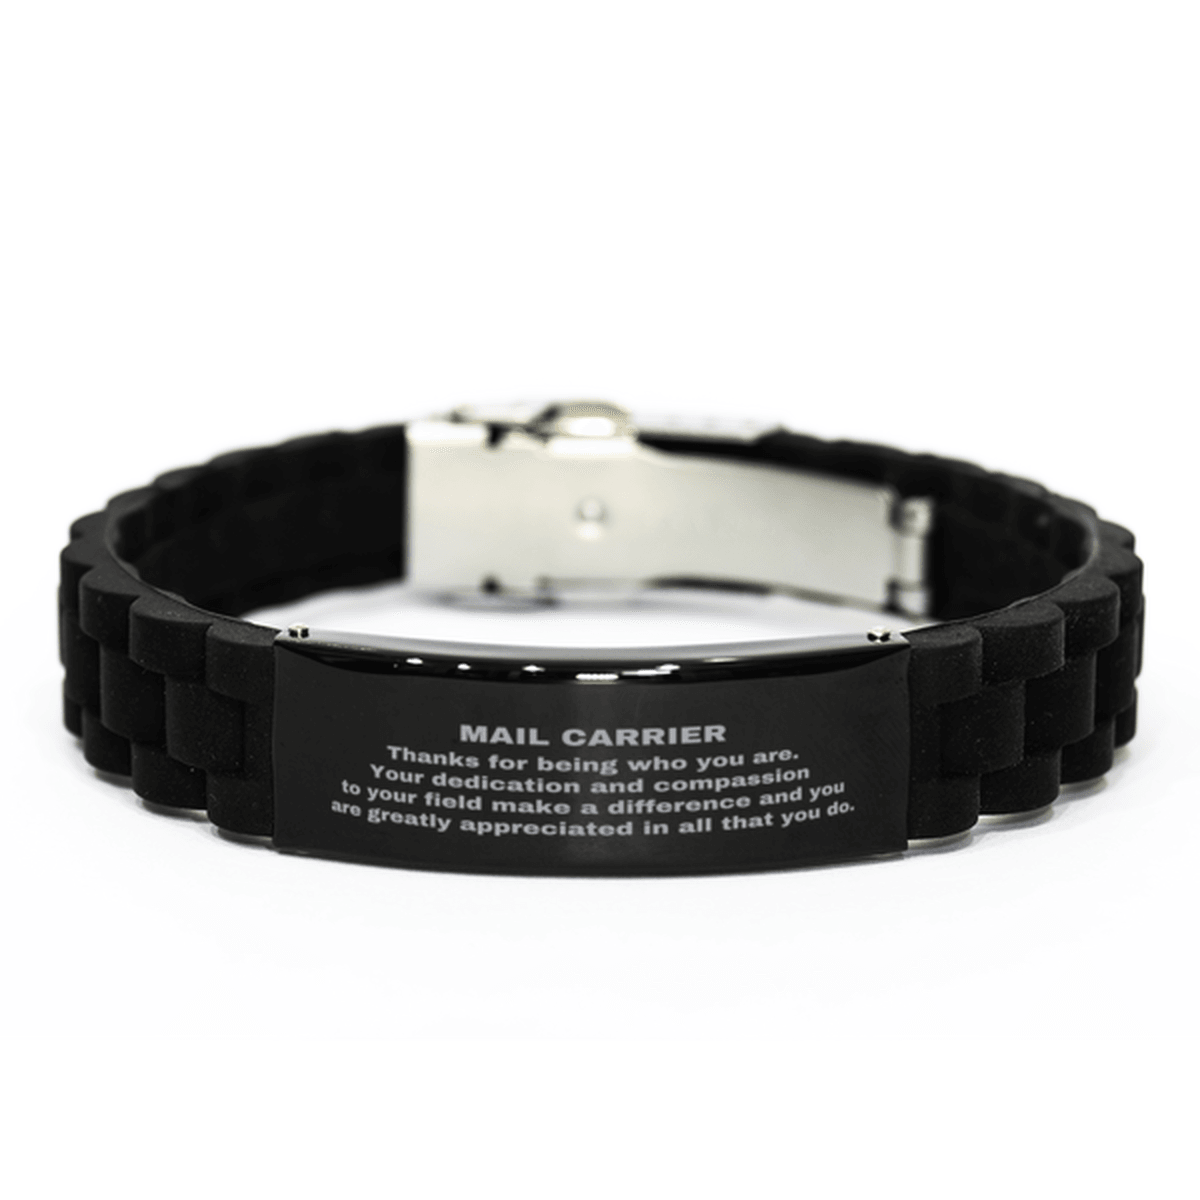 Mail Carrier Black Glidelock Clasp Engraved Bracelet - Thanks for being who you are - Birthday Christmas Jewelry Gifts Coworkers Colleague Boss